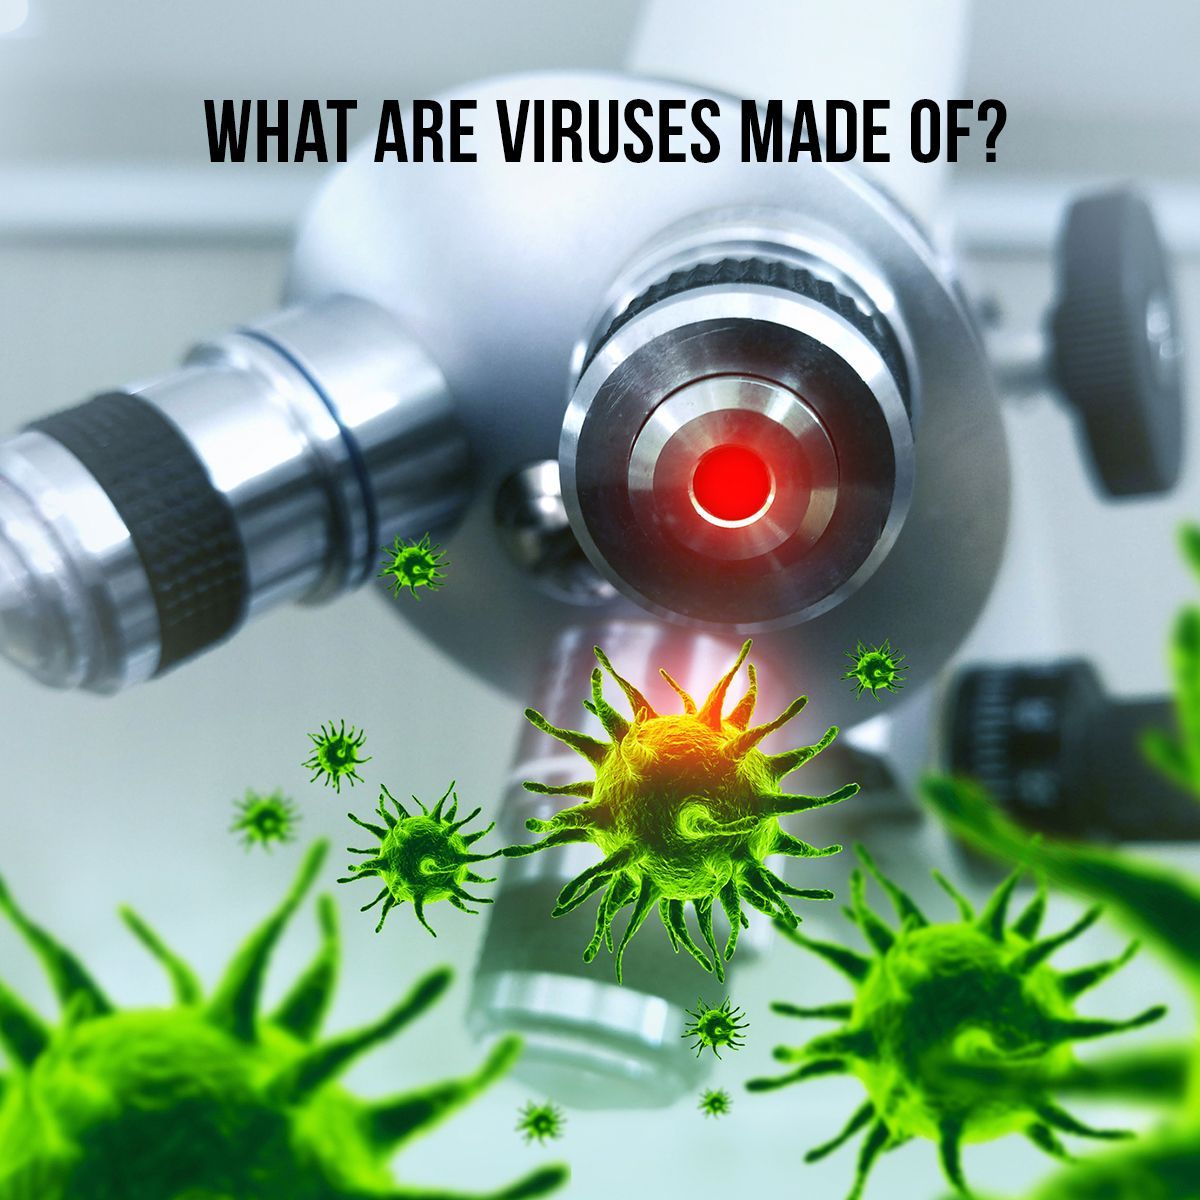 What Are Viruses Made Of?